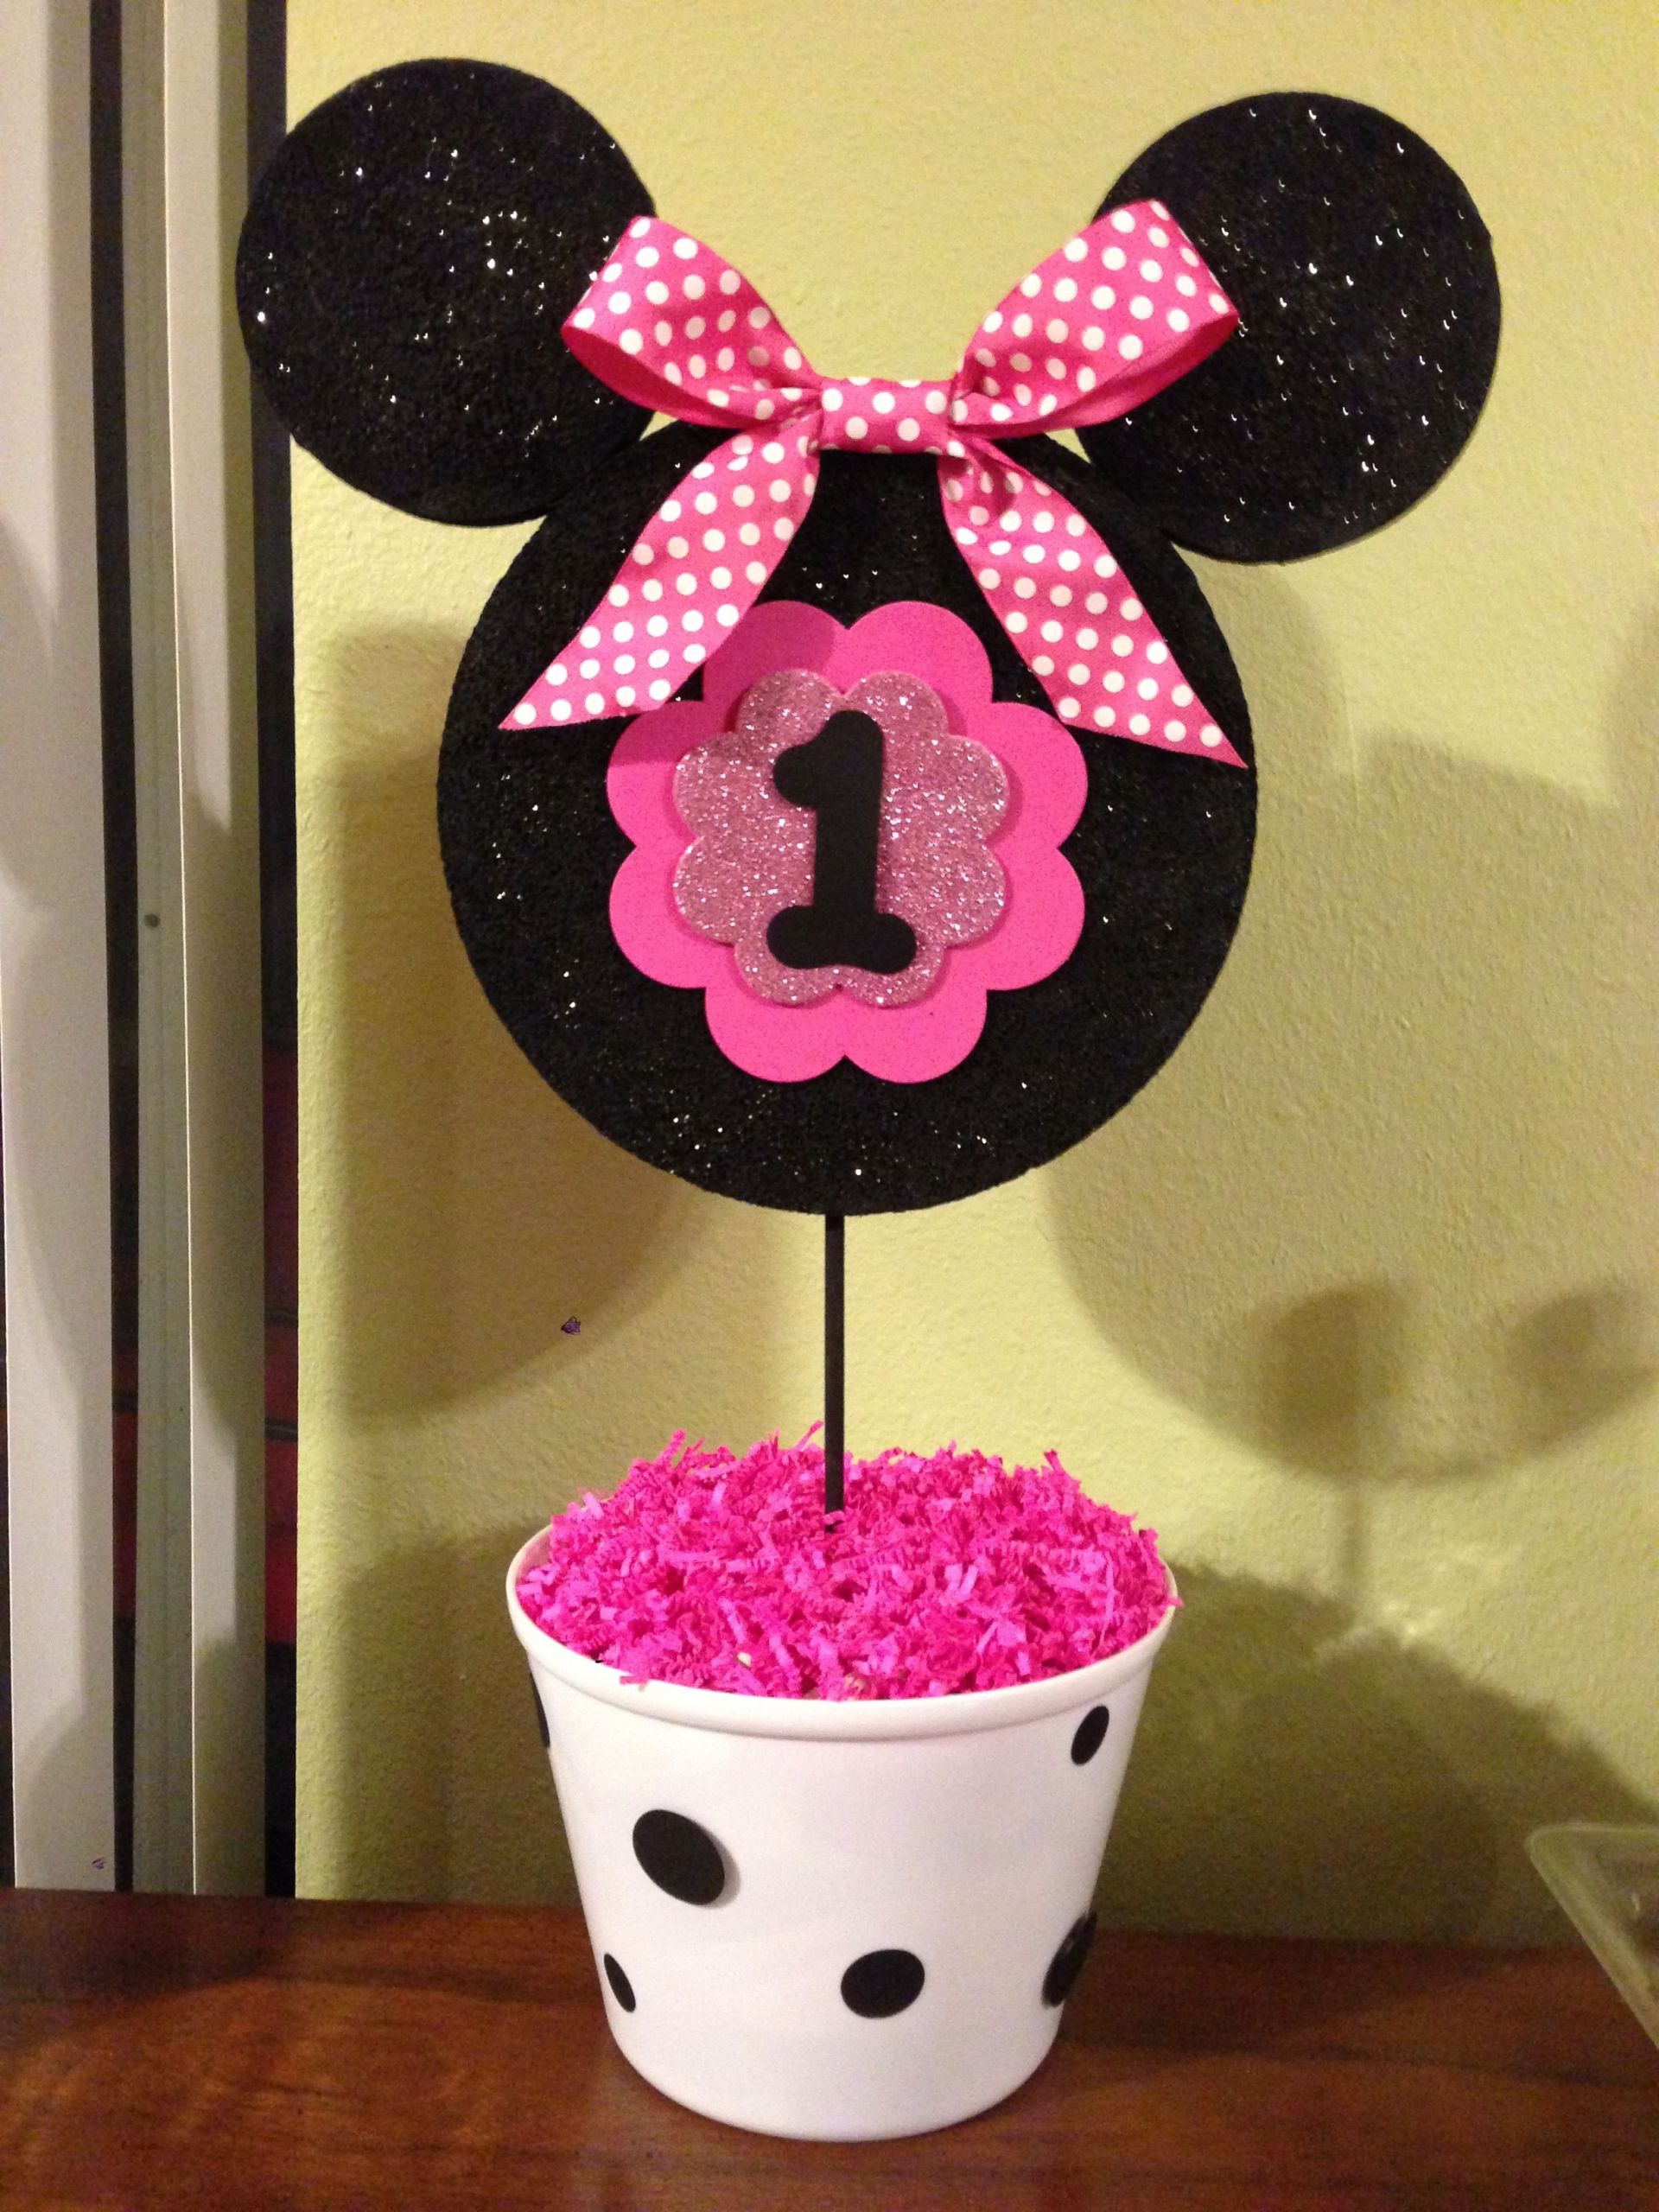 Minnie Mouse Ideas For 1st Birthday Party
 Minnie Mouse 1st birthday centerpiece